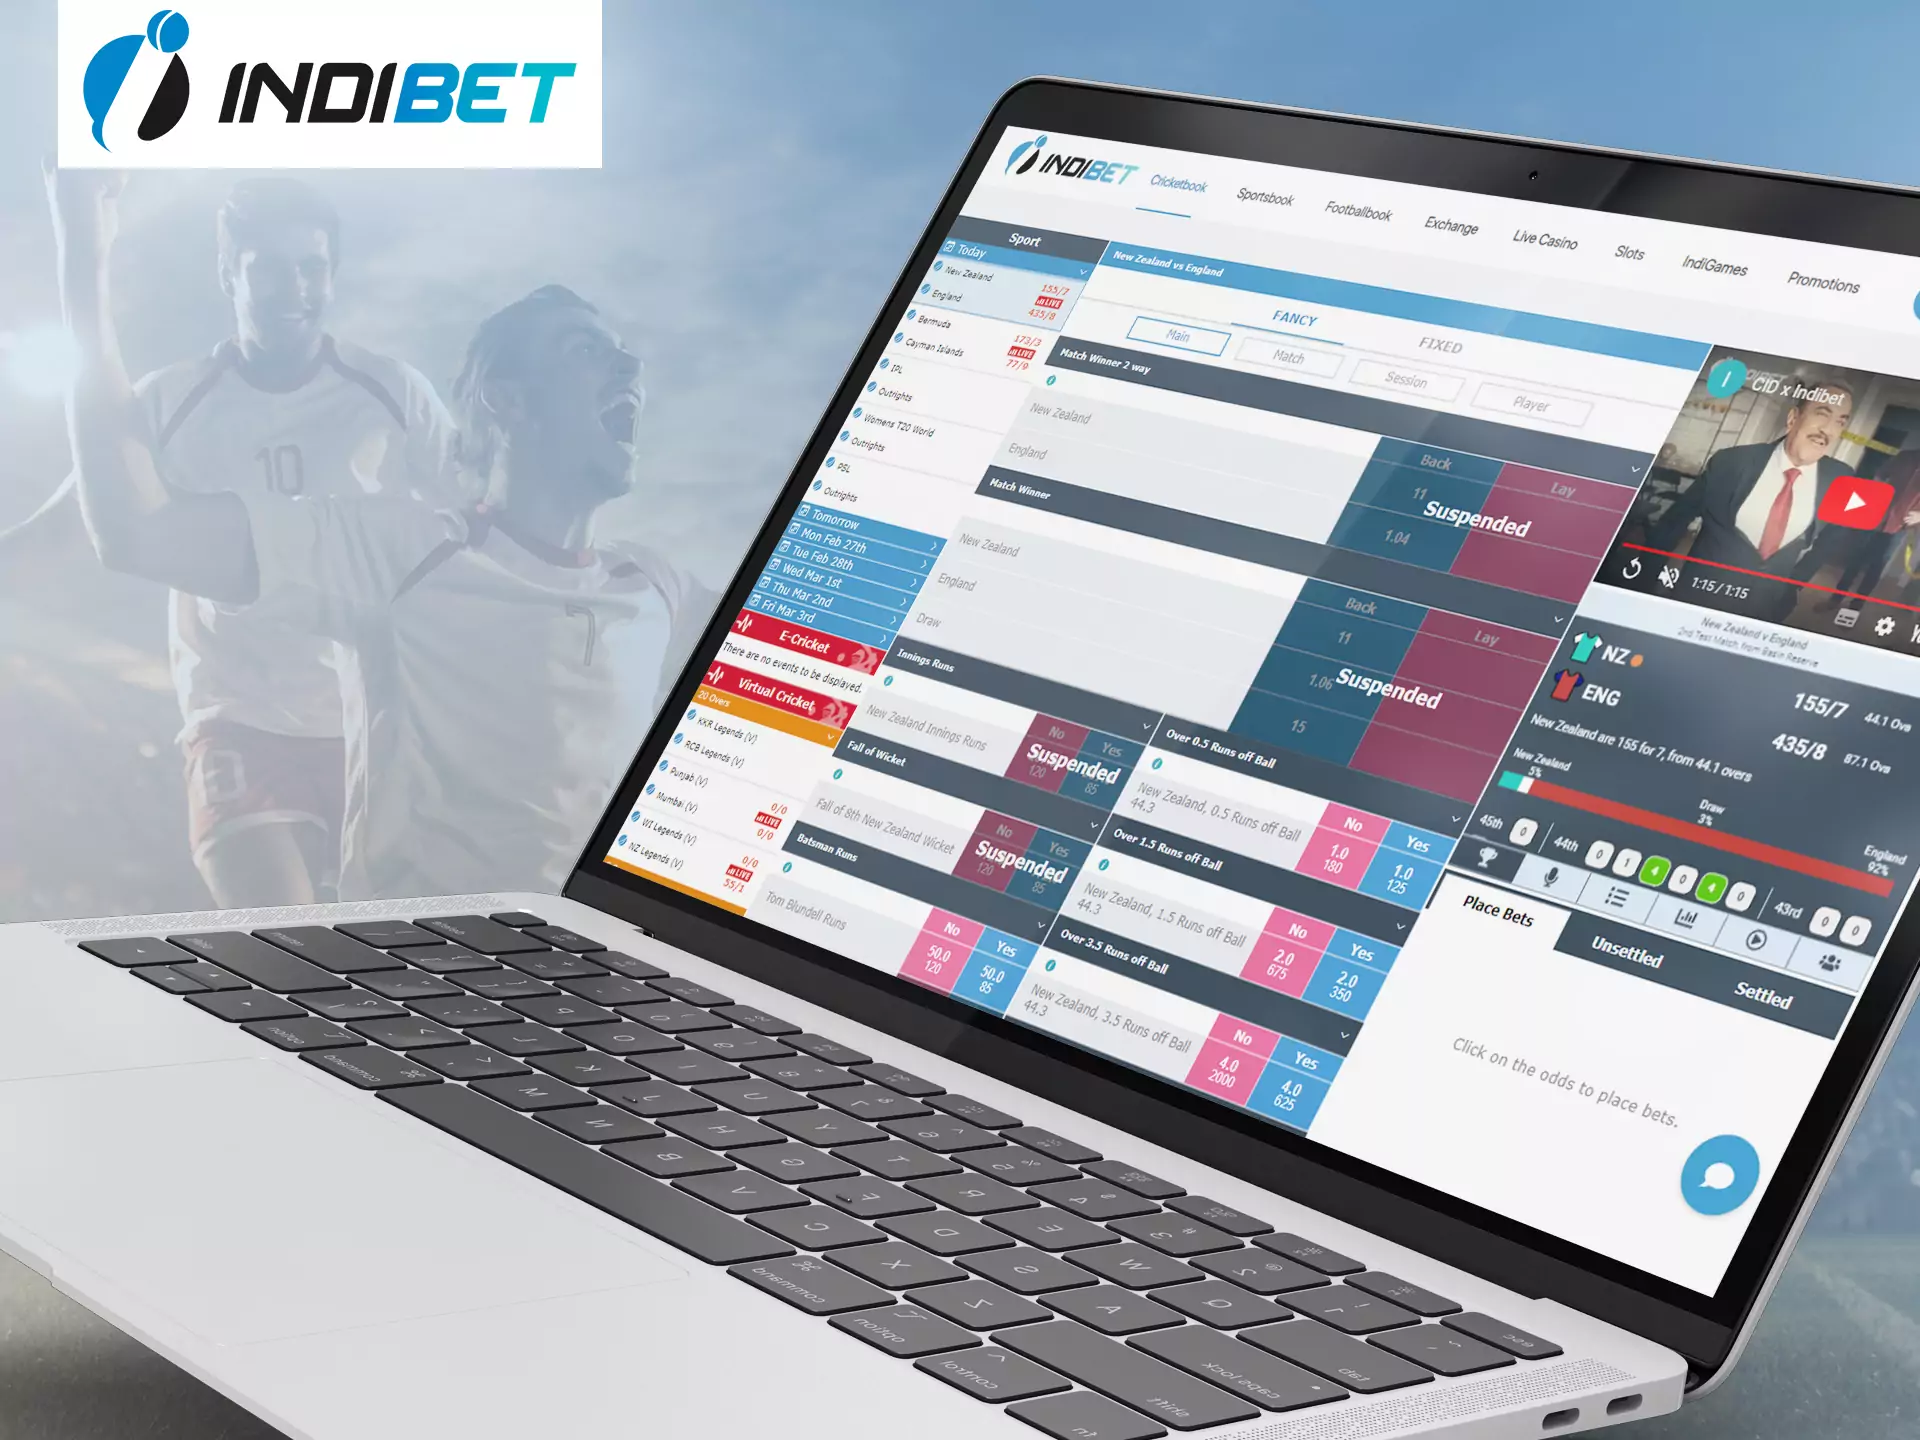 With Indibet, play and bet on your personal computer.